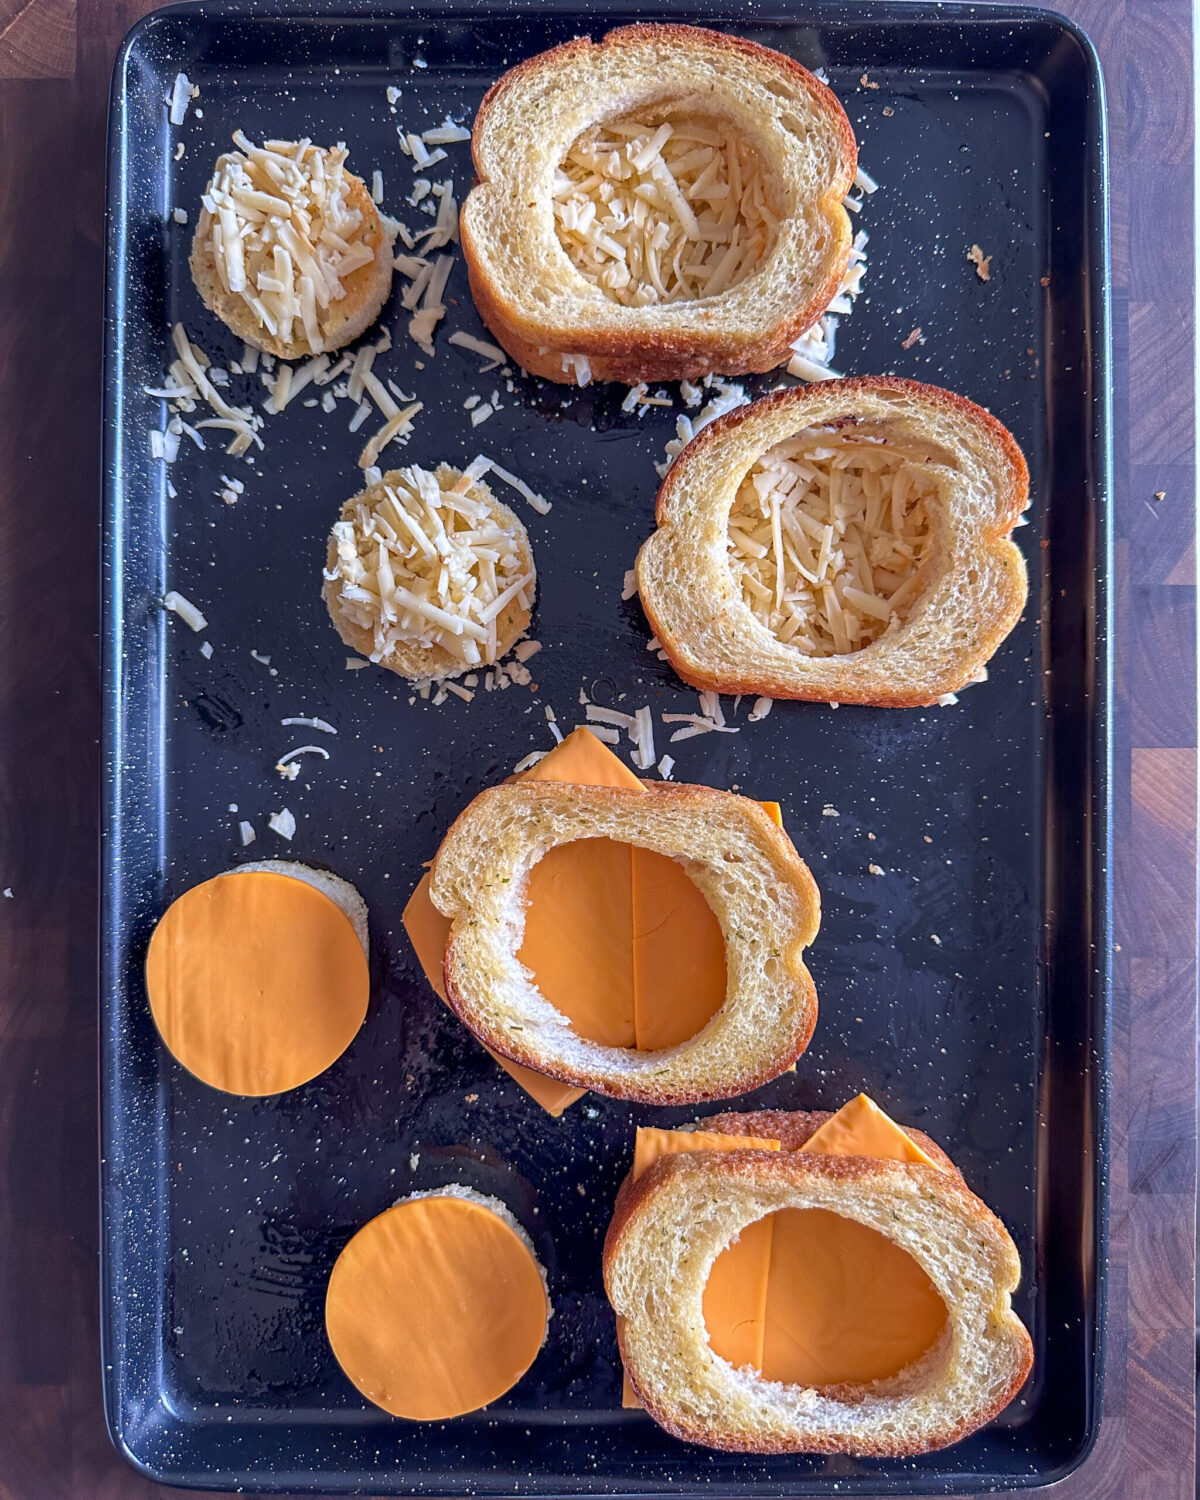 Add the processed cheese slices or grated smoked Gouda to the full toast slices. Place a toast slice with a circle cut out, on top of each cheese covered toast slice to form a sandwich.